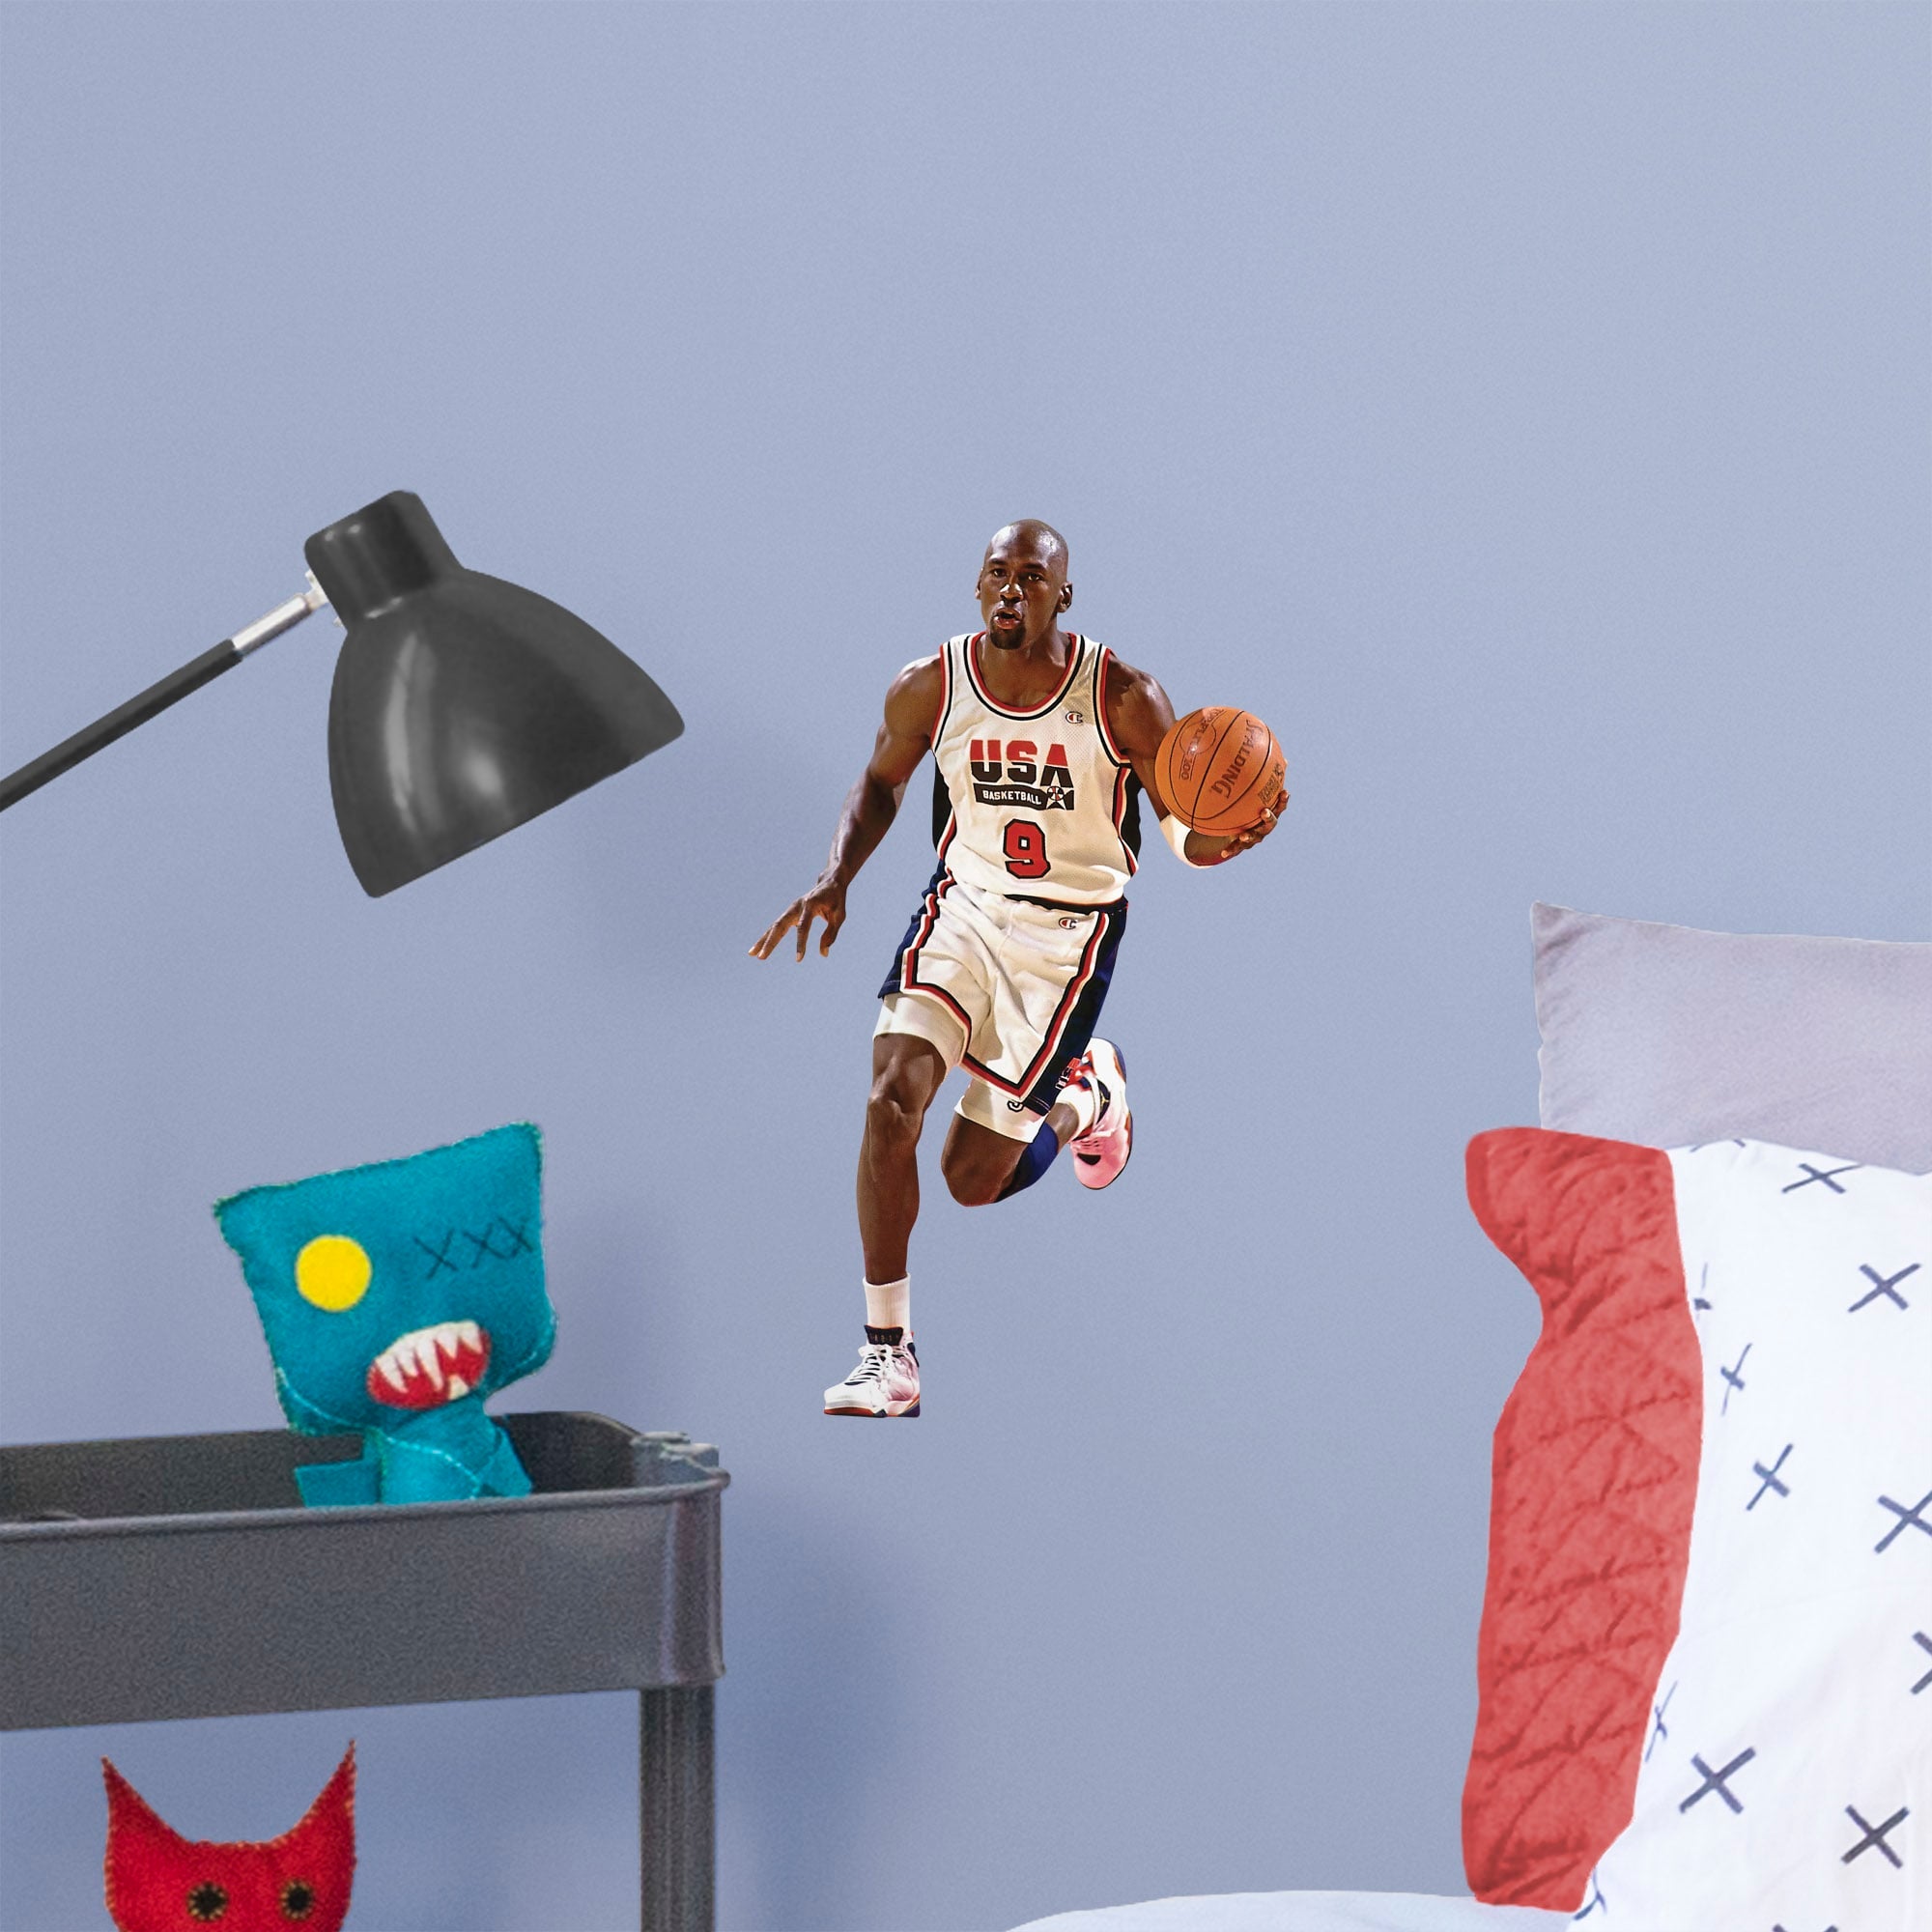 Michael Jordan: 1992 Dream Team - Officially Licensed NBA Removable Wall Decal Large by Fathead